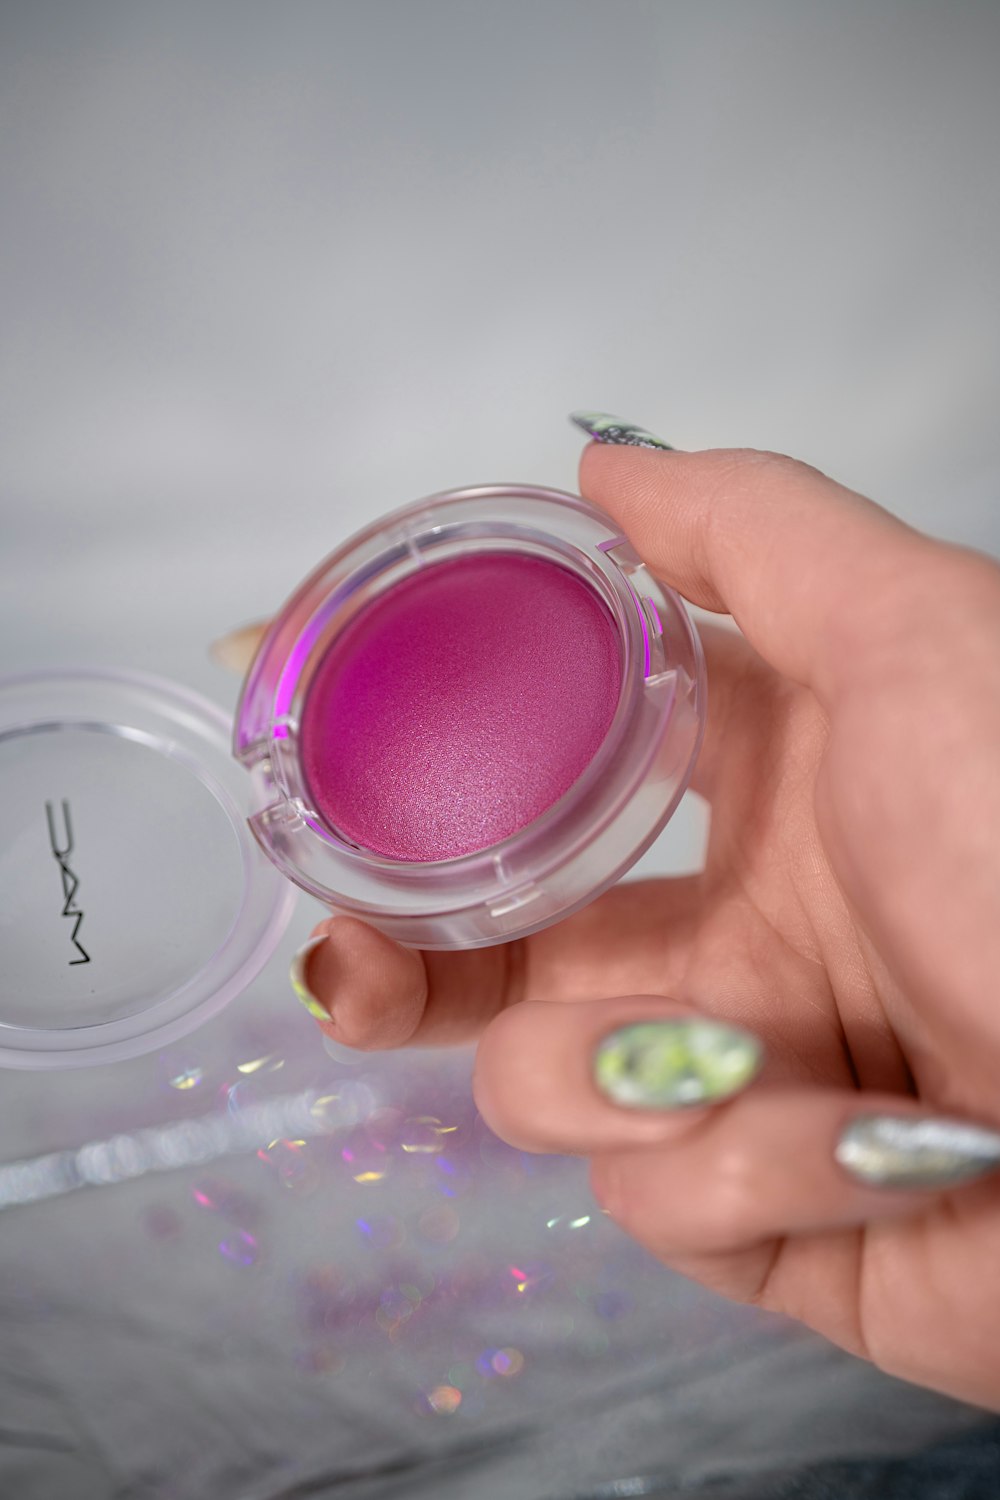 a person holding a pink powder in their hand